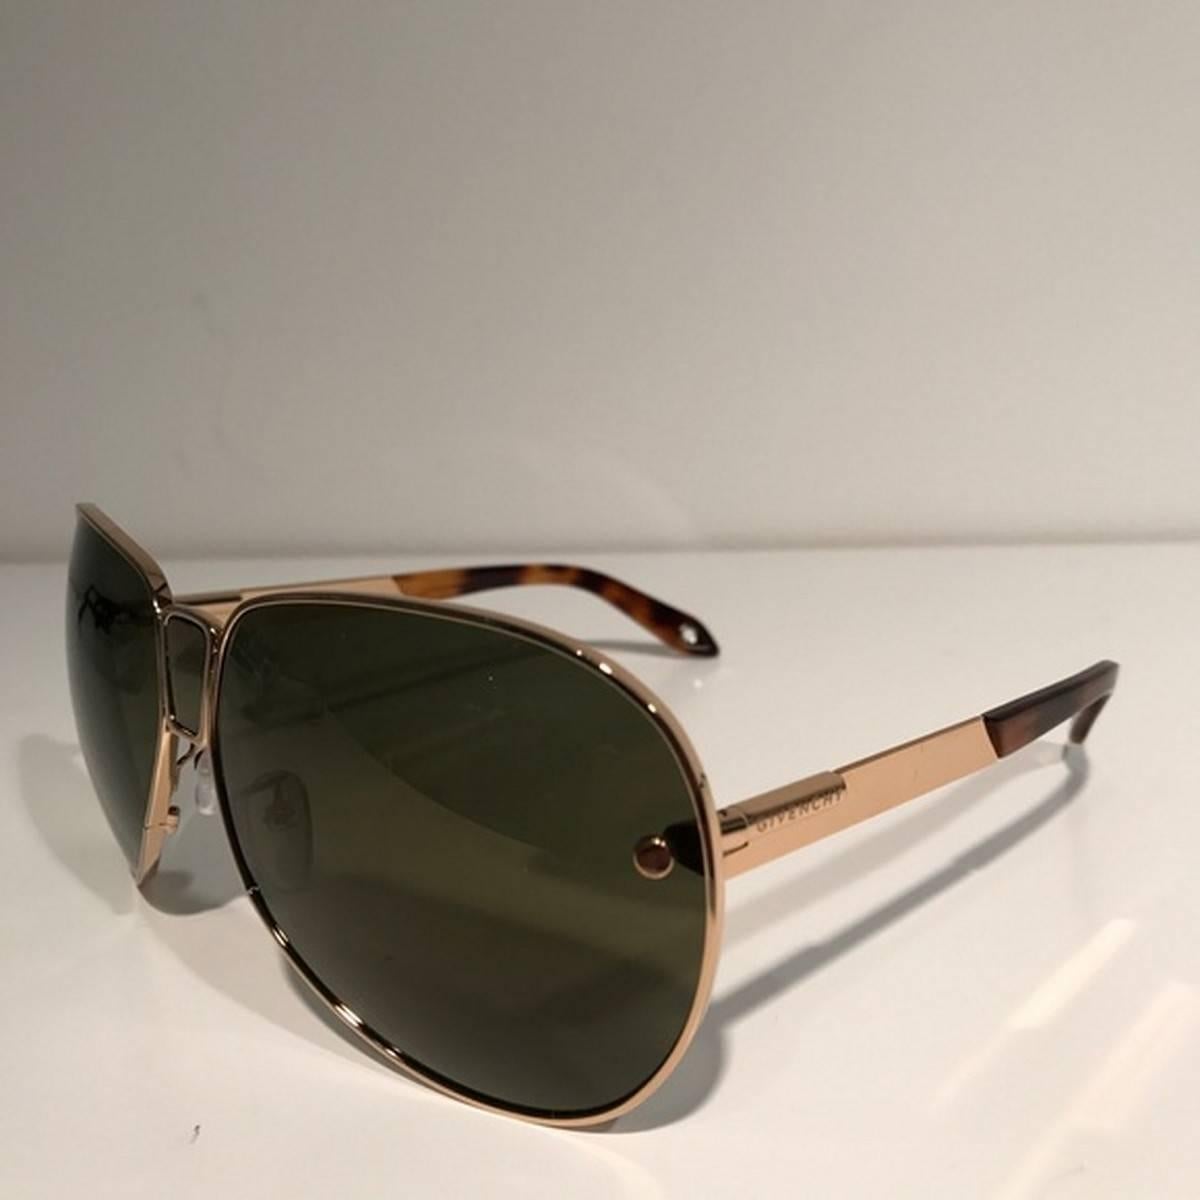 Givenchy Gold Aviator Sunglasses
Color: Gold/Green
Size: OS

Brand new with box.
Unused condition.
No flaws.
Made in Italy.